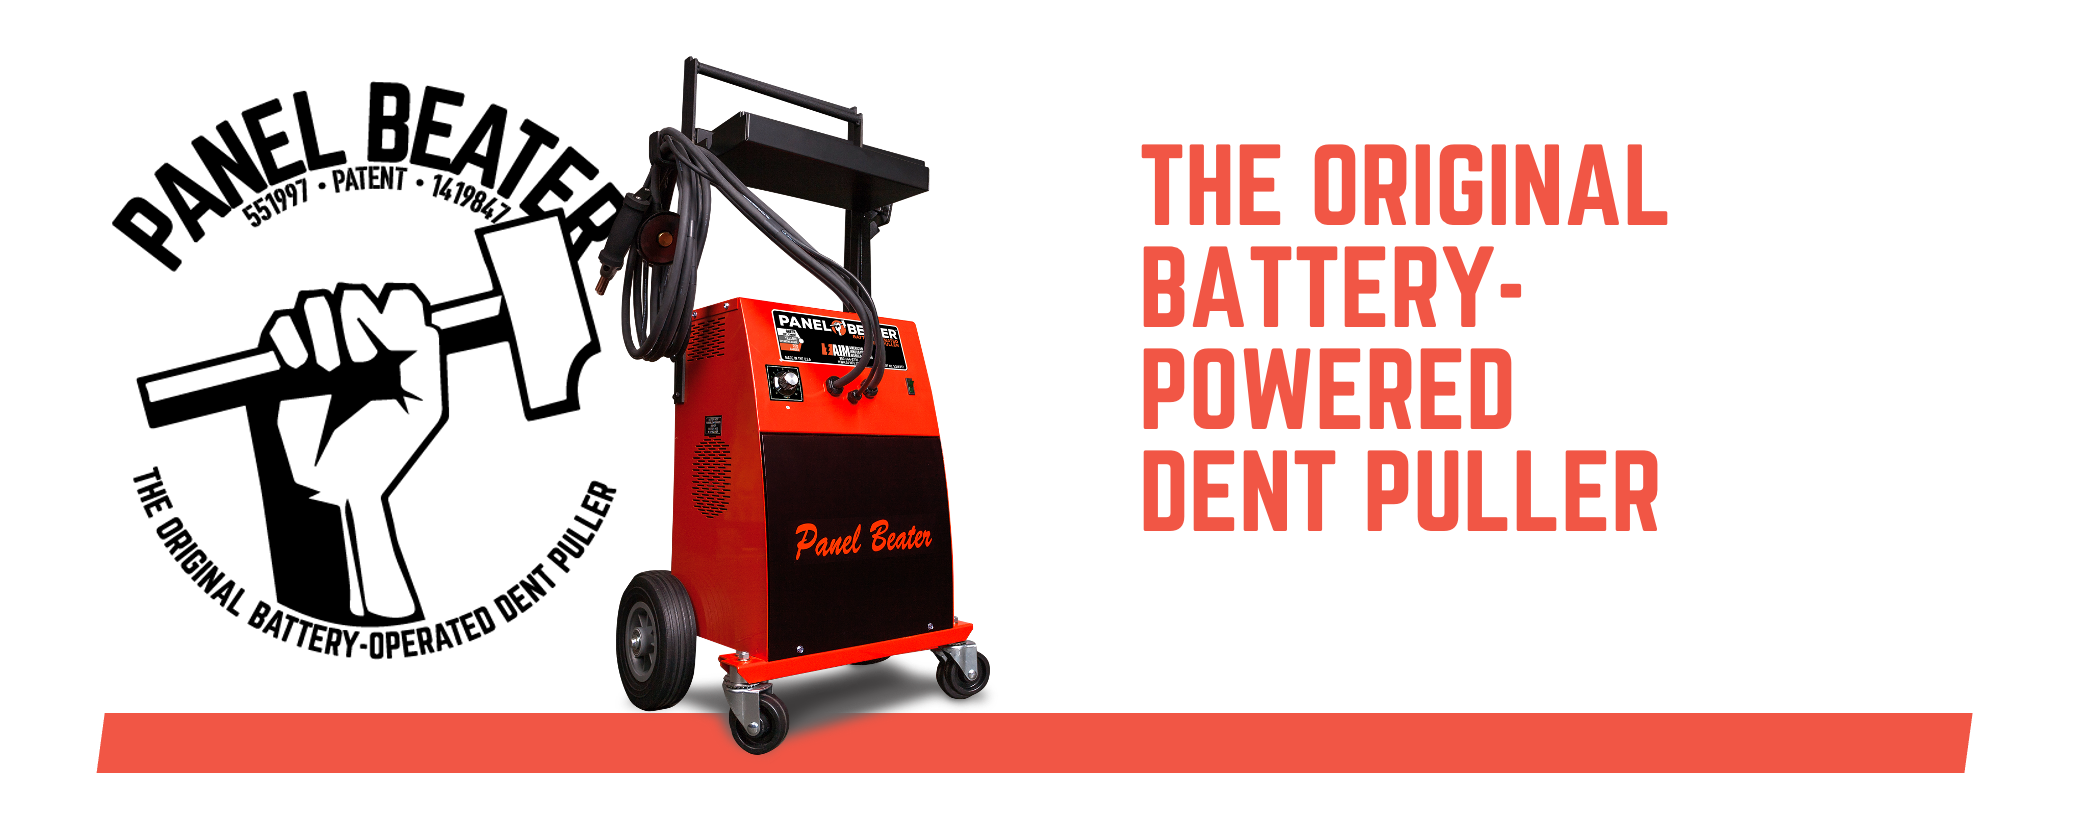 Battery-Powered Dent Pullers